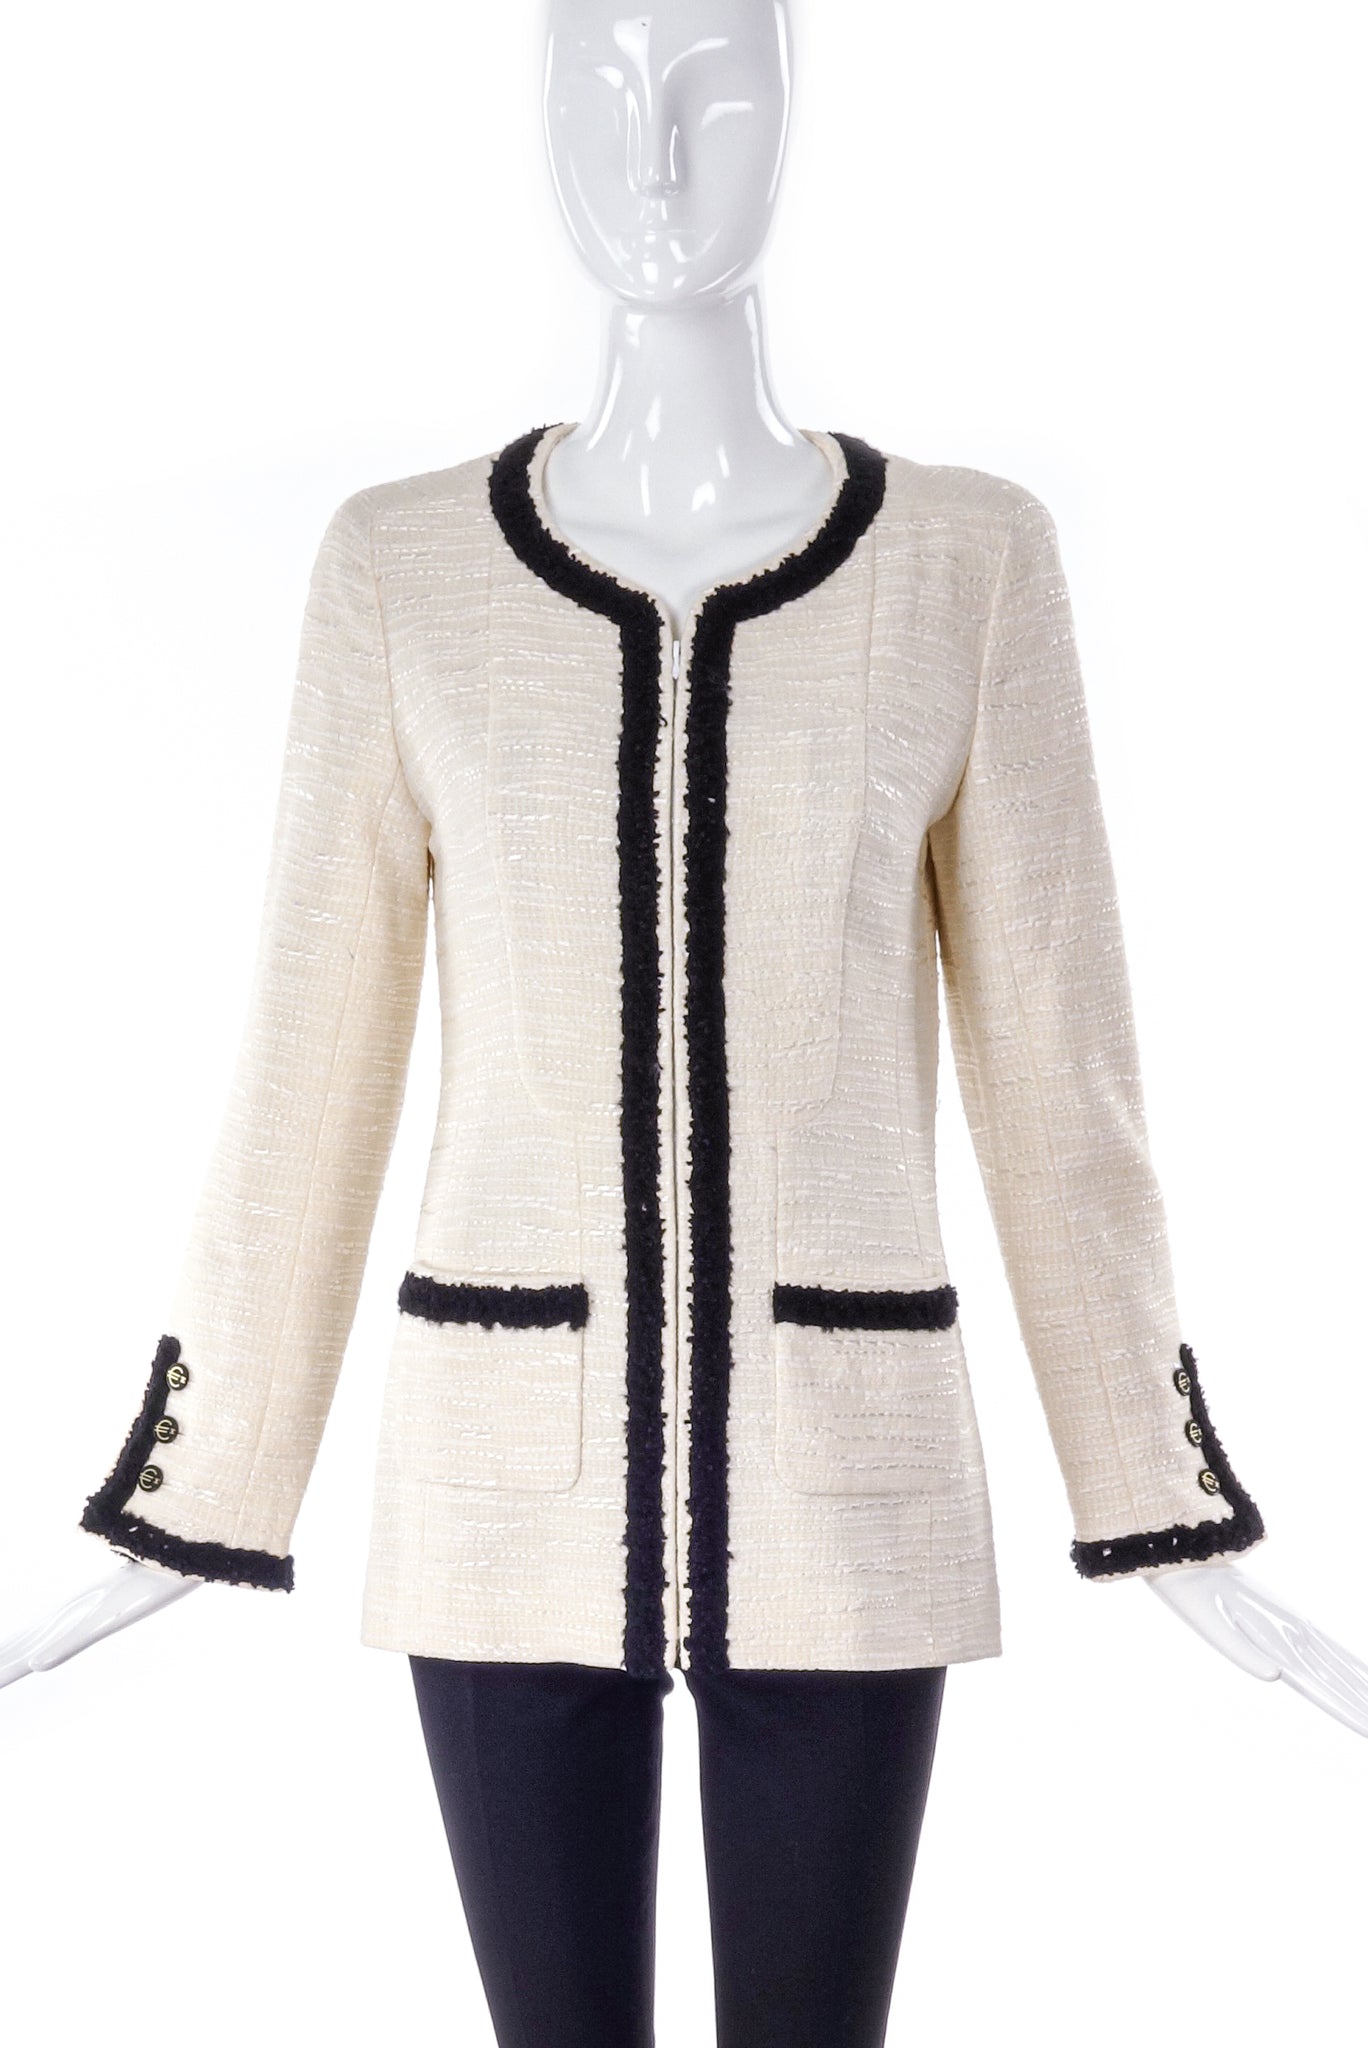 Chanel Ivory and Black Tweed Jacket  BOUTIQUE PURCHASE PRICE   PauméLosAngeles